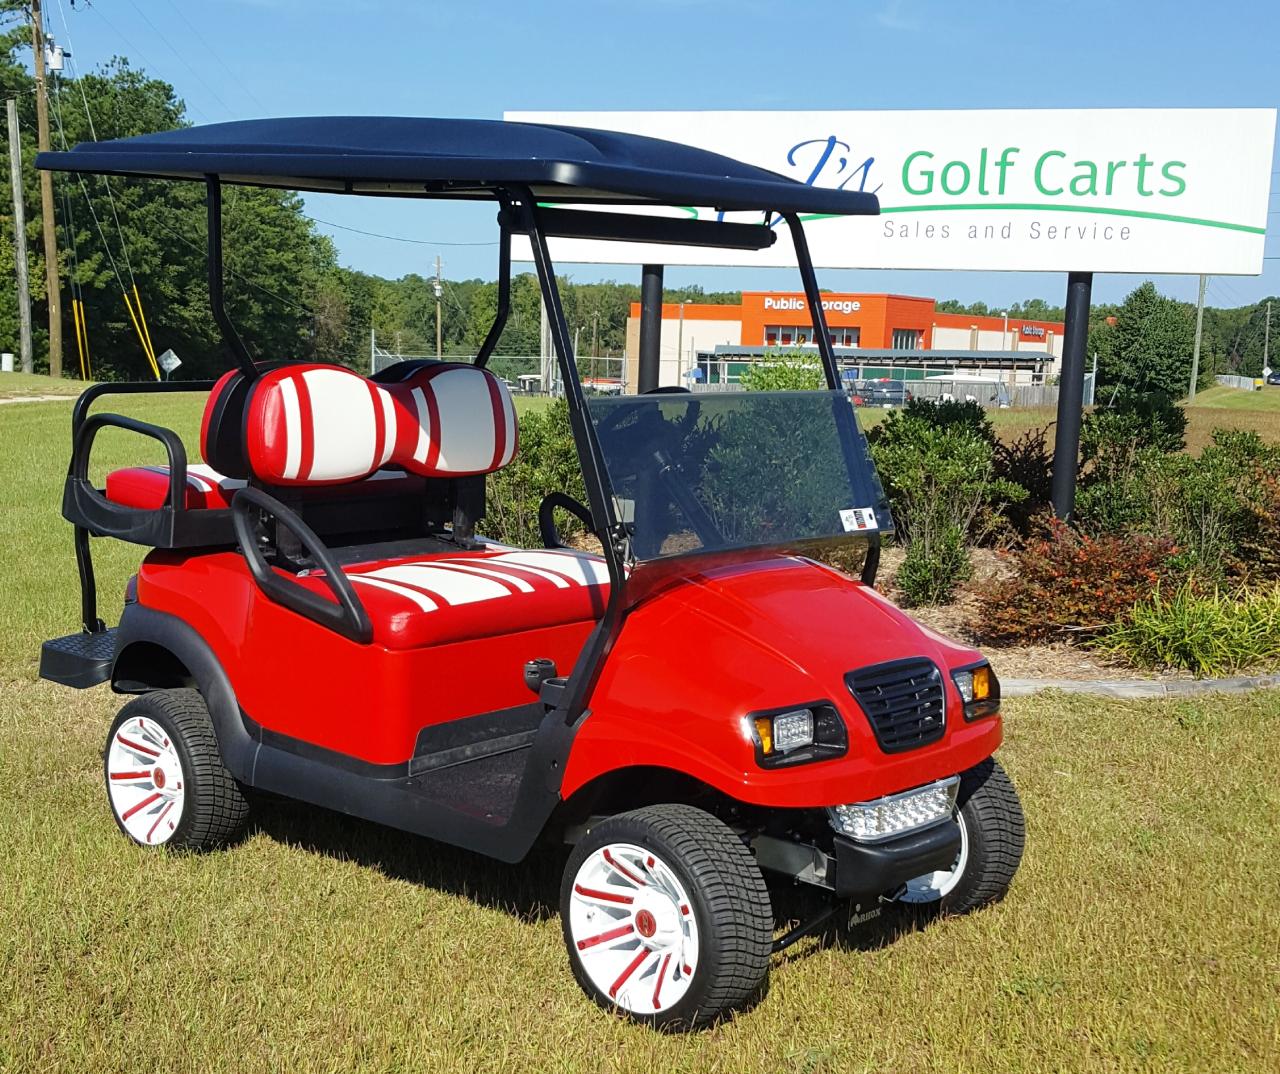 Used Golf Carts for Sale by Owner in San Lorenzo, Puerto Rico: Your Guide to Finding the Perfect Cart